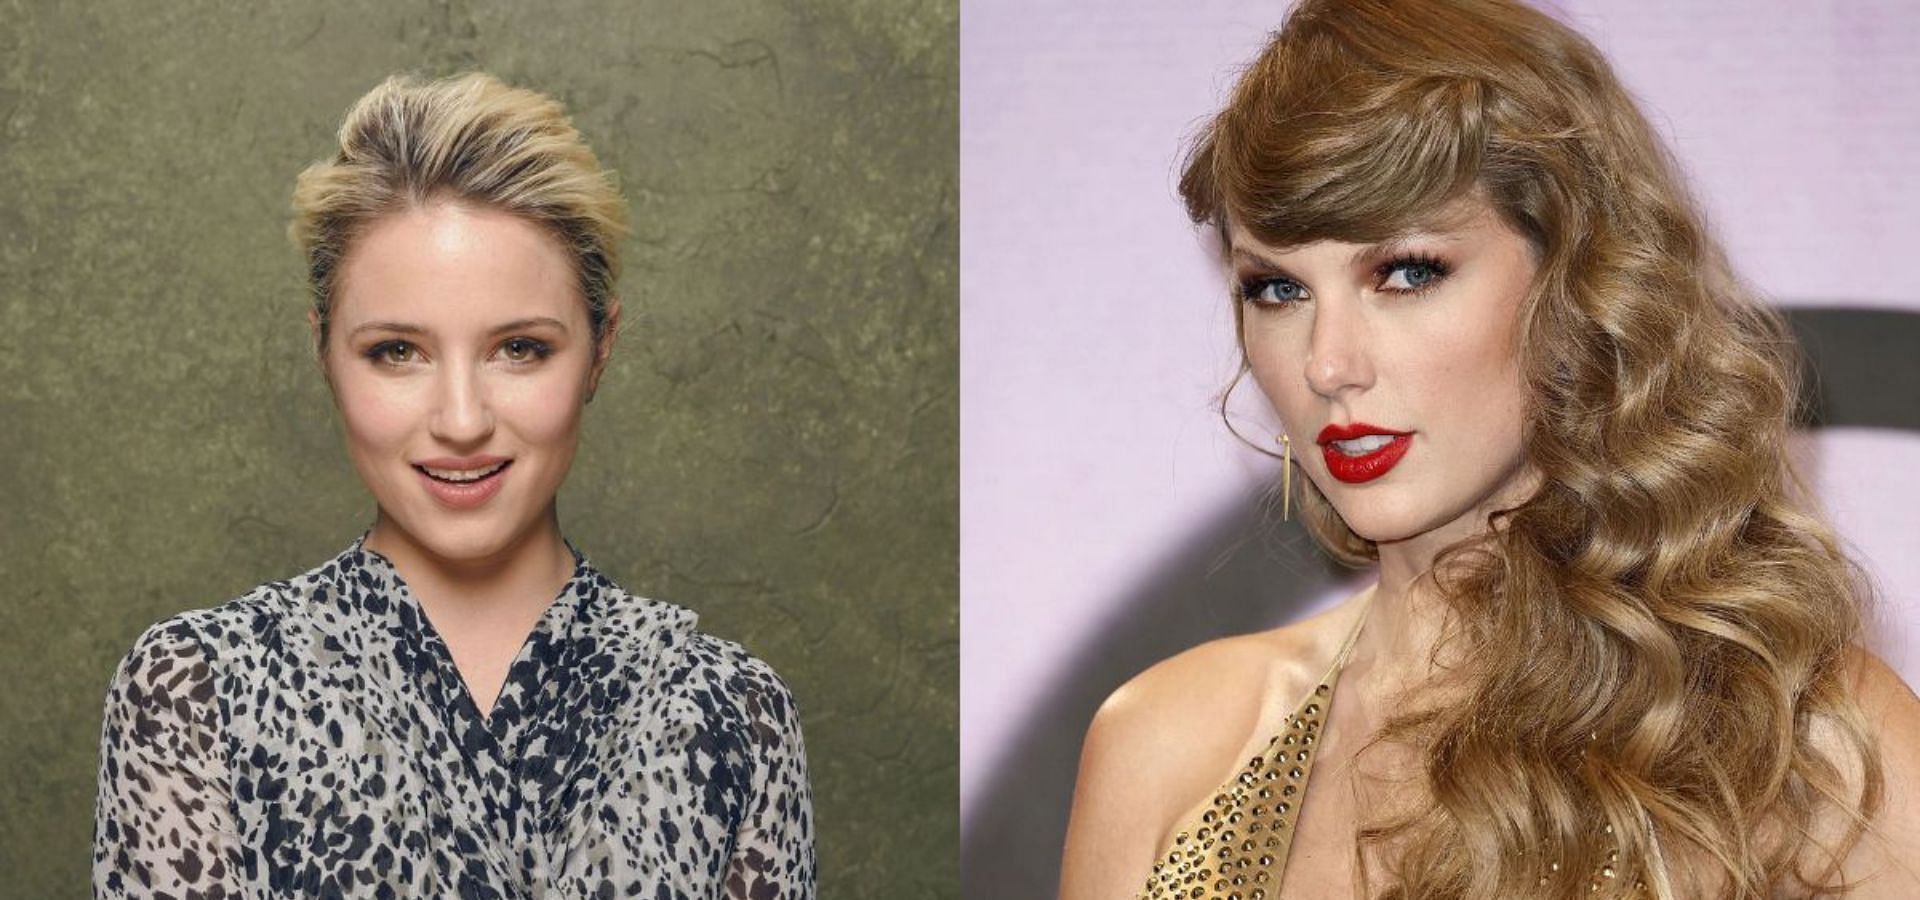 Taylor Swift (Photo by Frazer Harrison/Getty Images) and Dianna Agron (Photo by Larry Busacca/Getty Images)